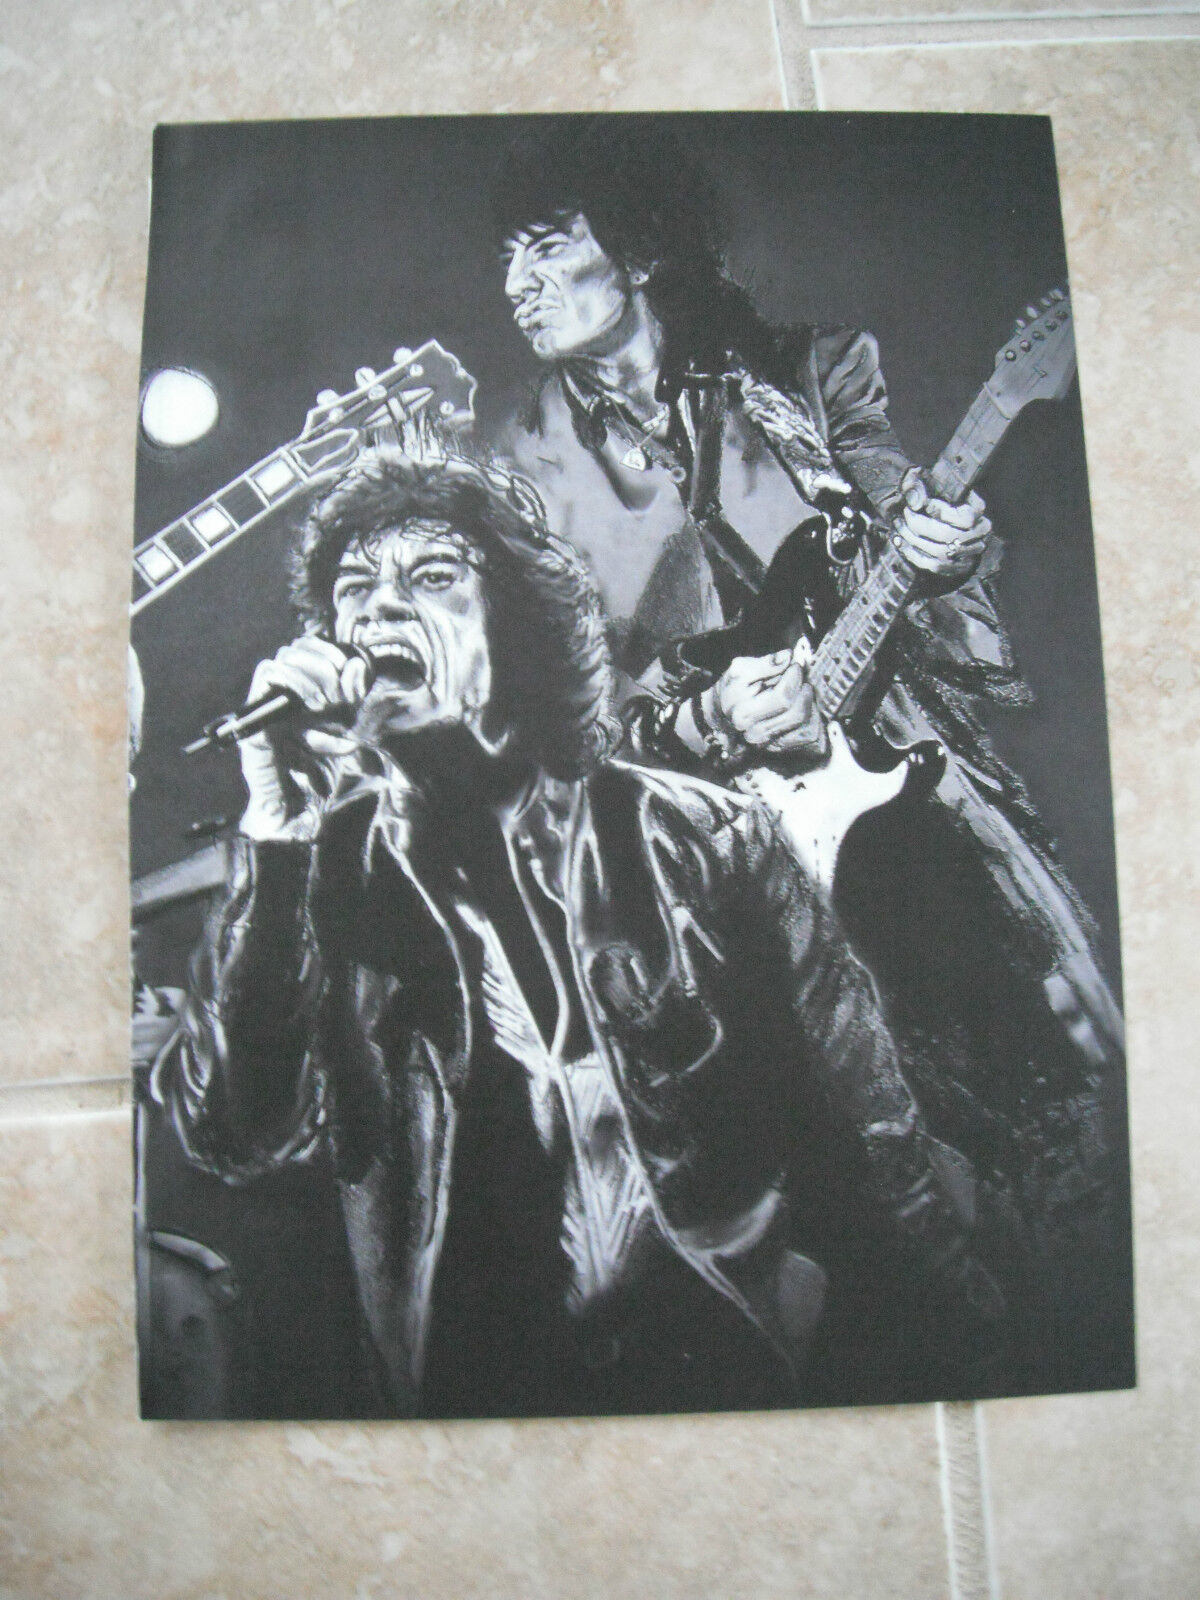 Rolling Stones Mick Ron Vtg Candid Coffee Table Book Photo Poster painting B&W Illustration